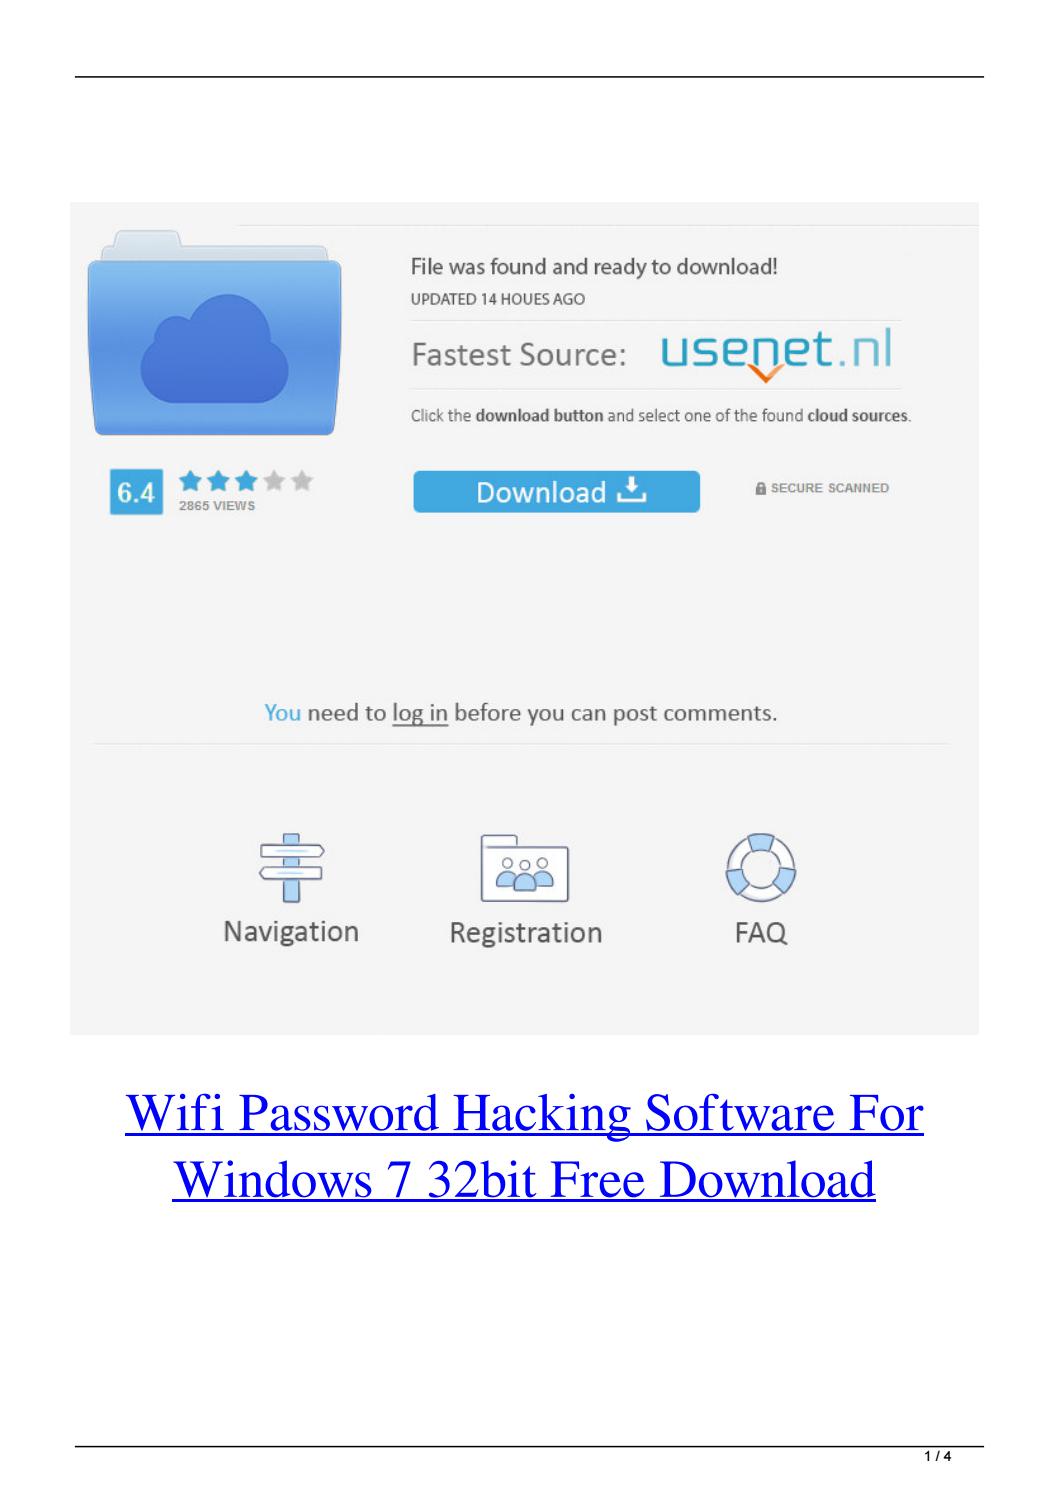 How to download hacking software